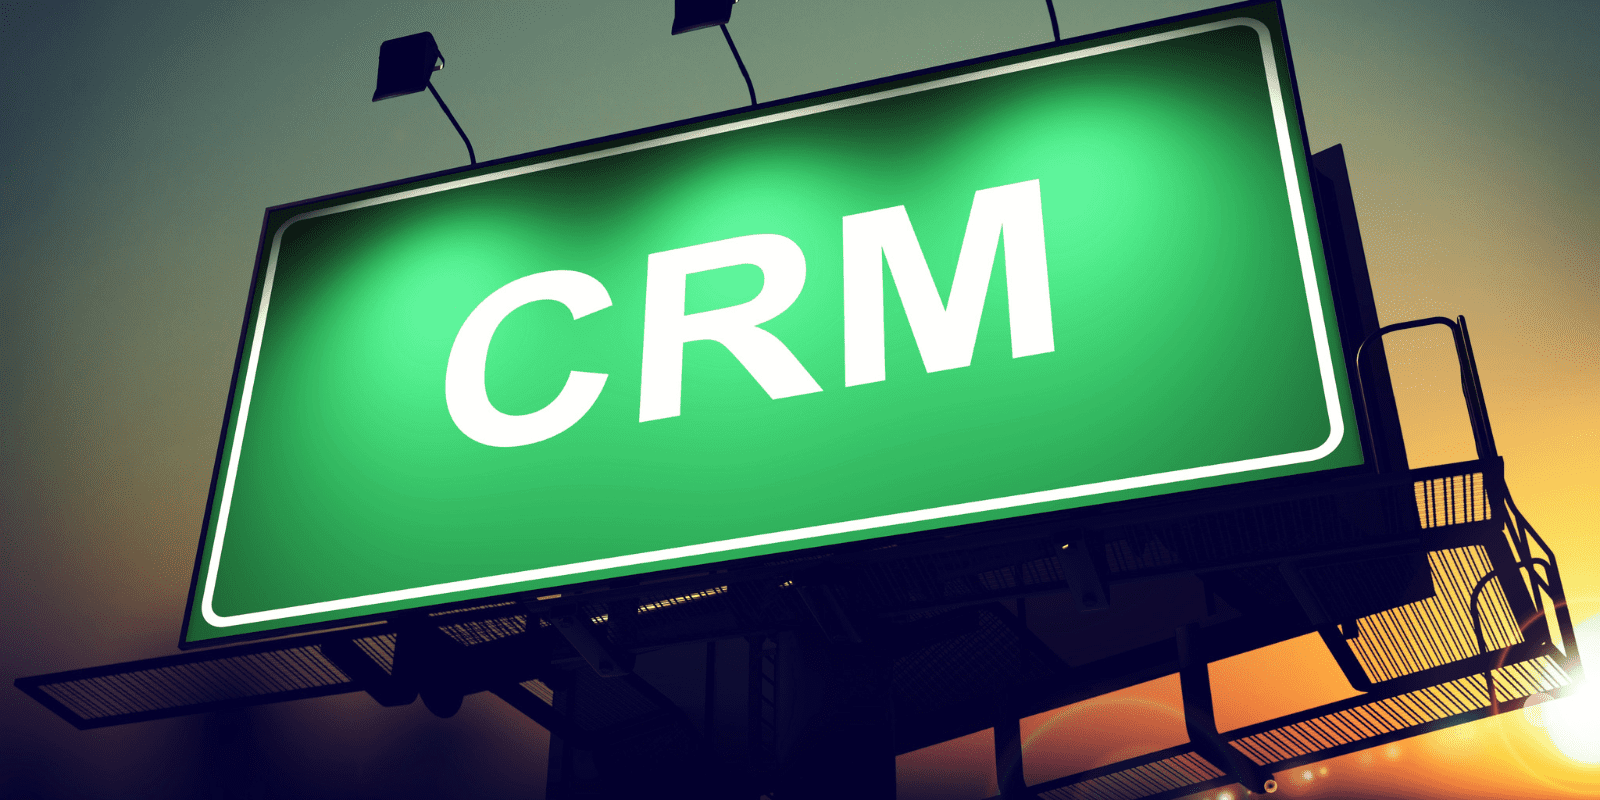 What should you expect your CRM to do for you?